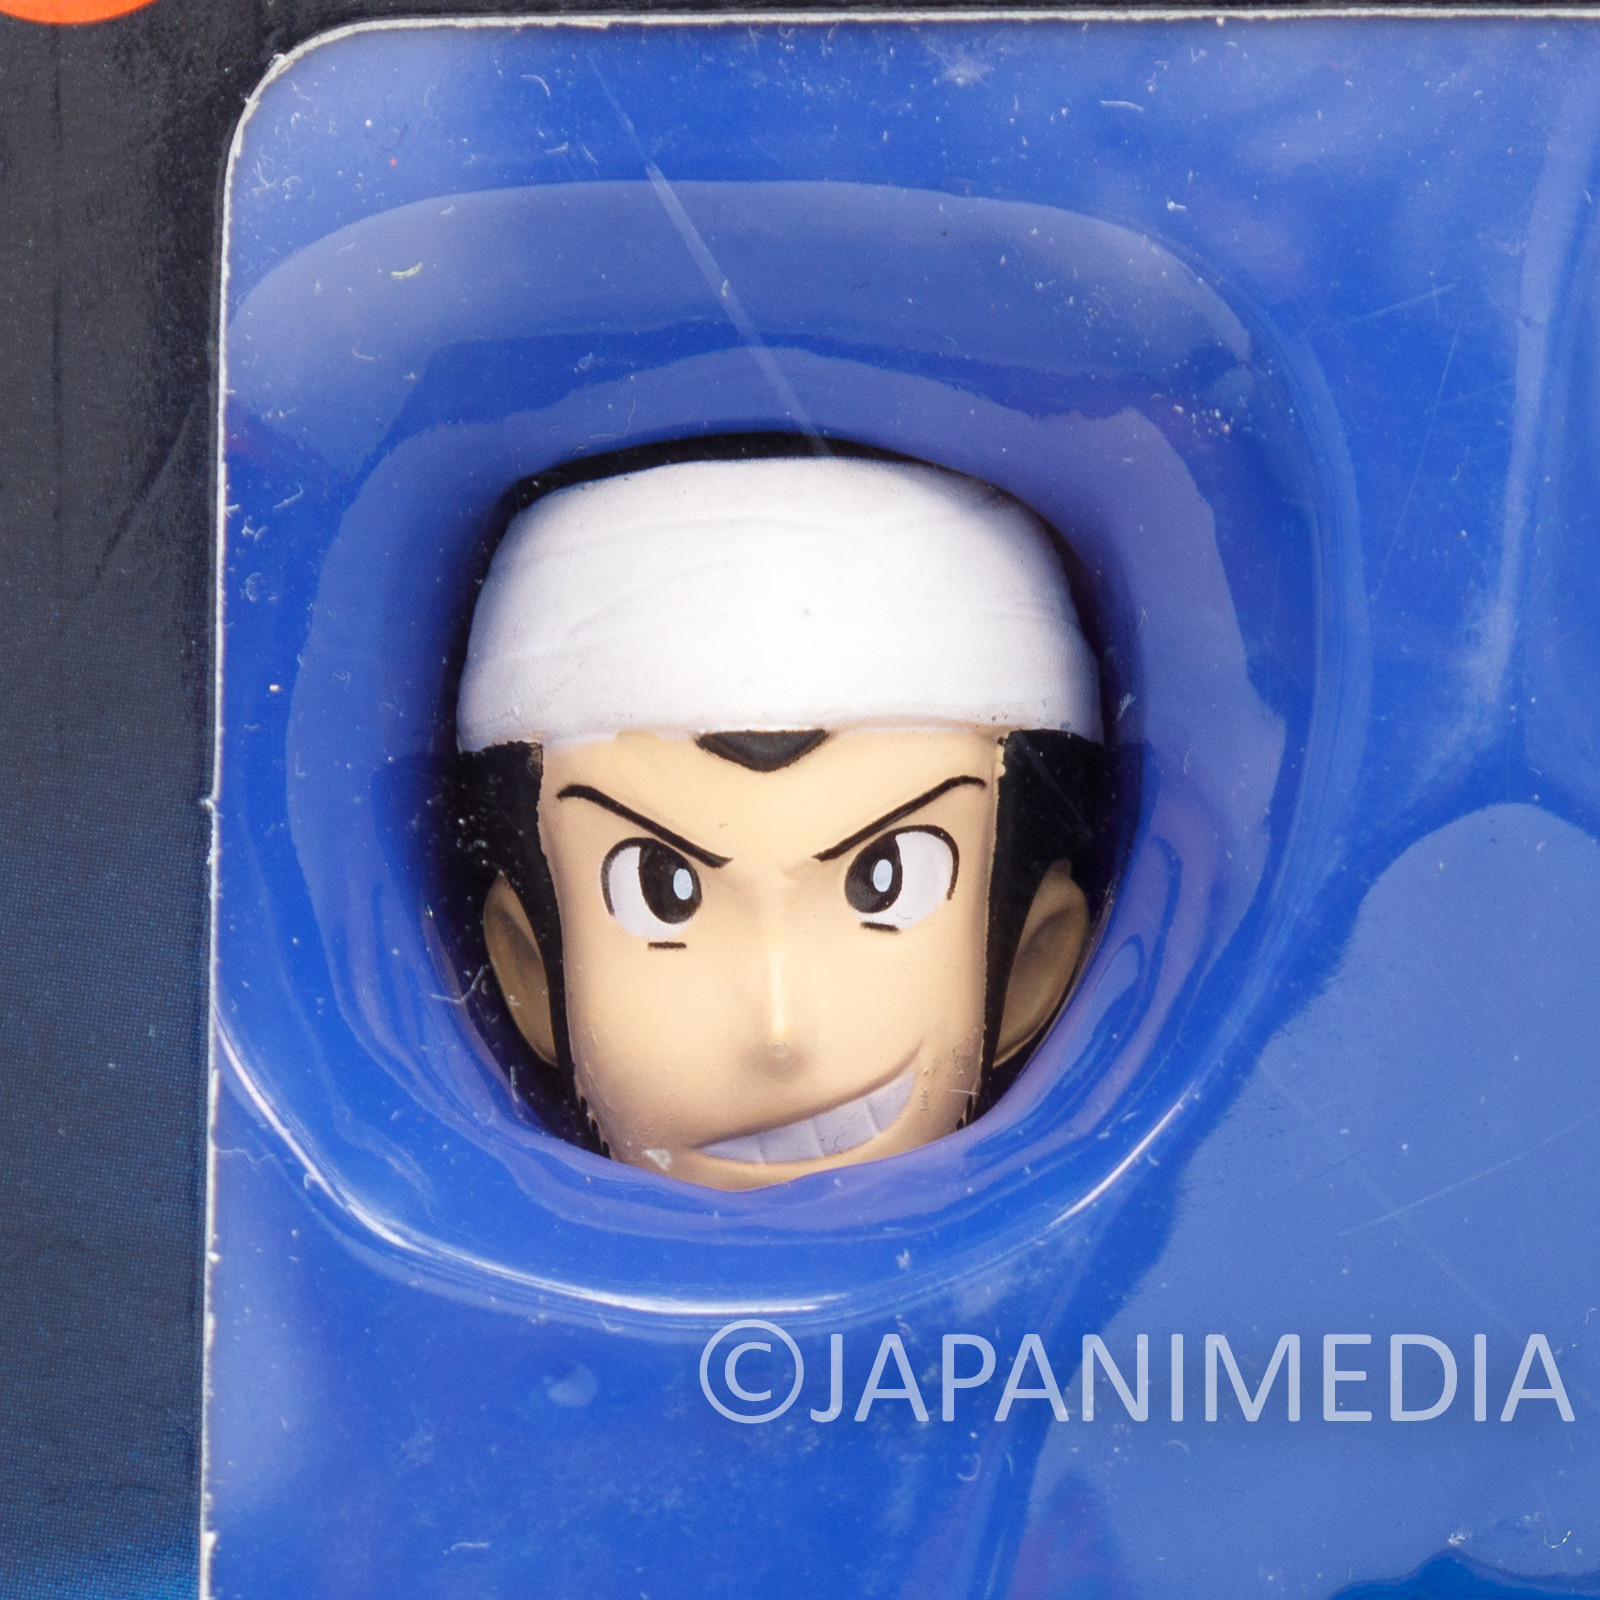 Lupin the Third (3rd) DX 7 inch Figure The Castle of Cagliostro Banpresto JAPAN ANIME